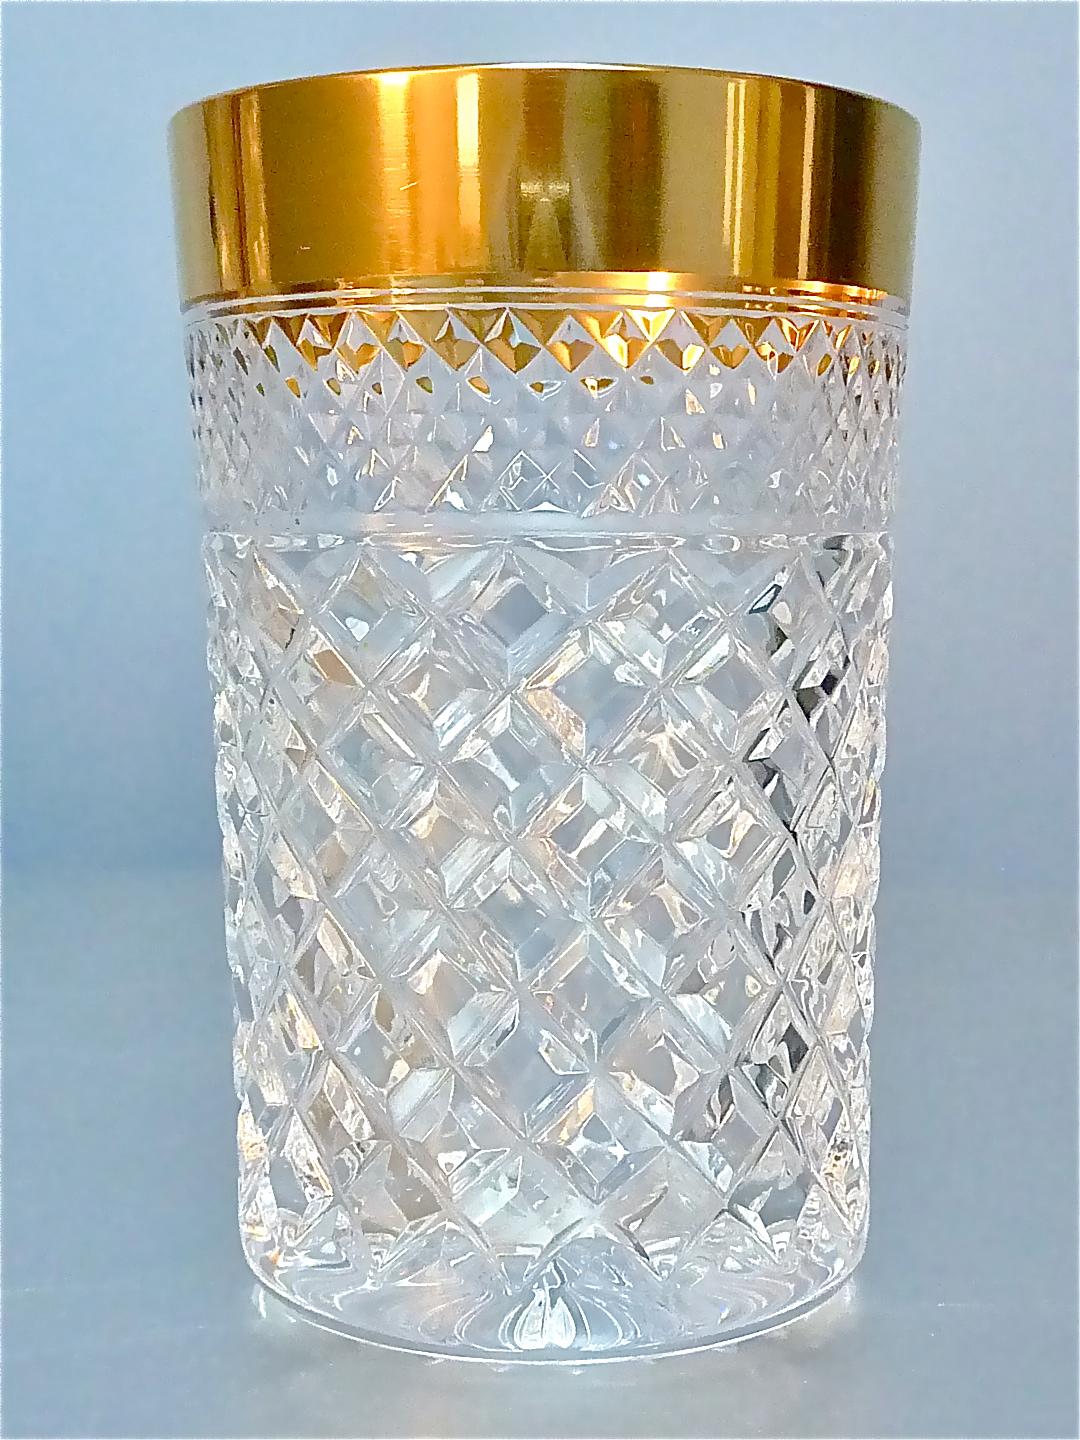 Hollywood Regency Precious 6 Water Glasses Gold Crystal Glass Tumbler Josephinenhuette Moser For Sale